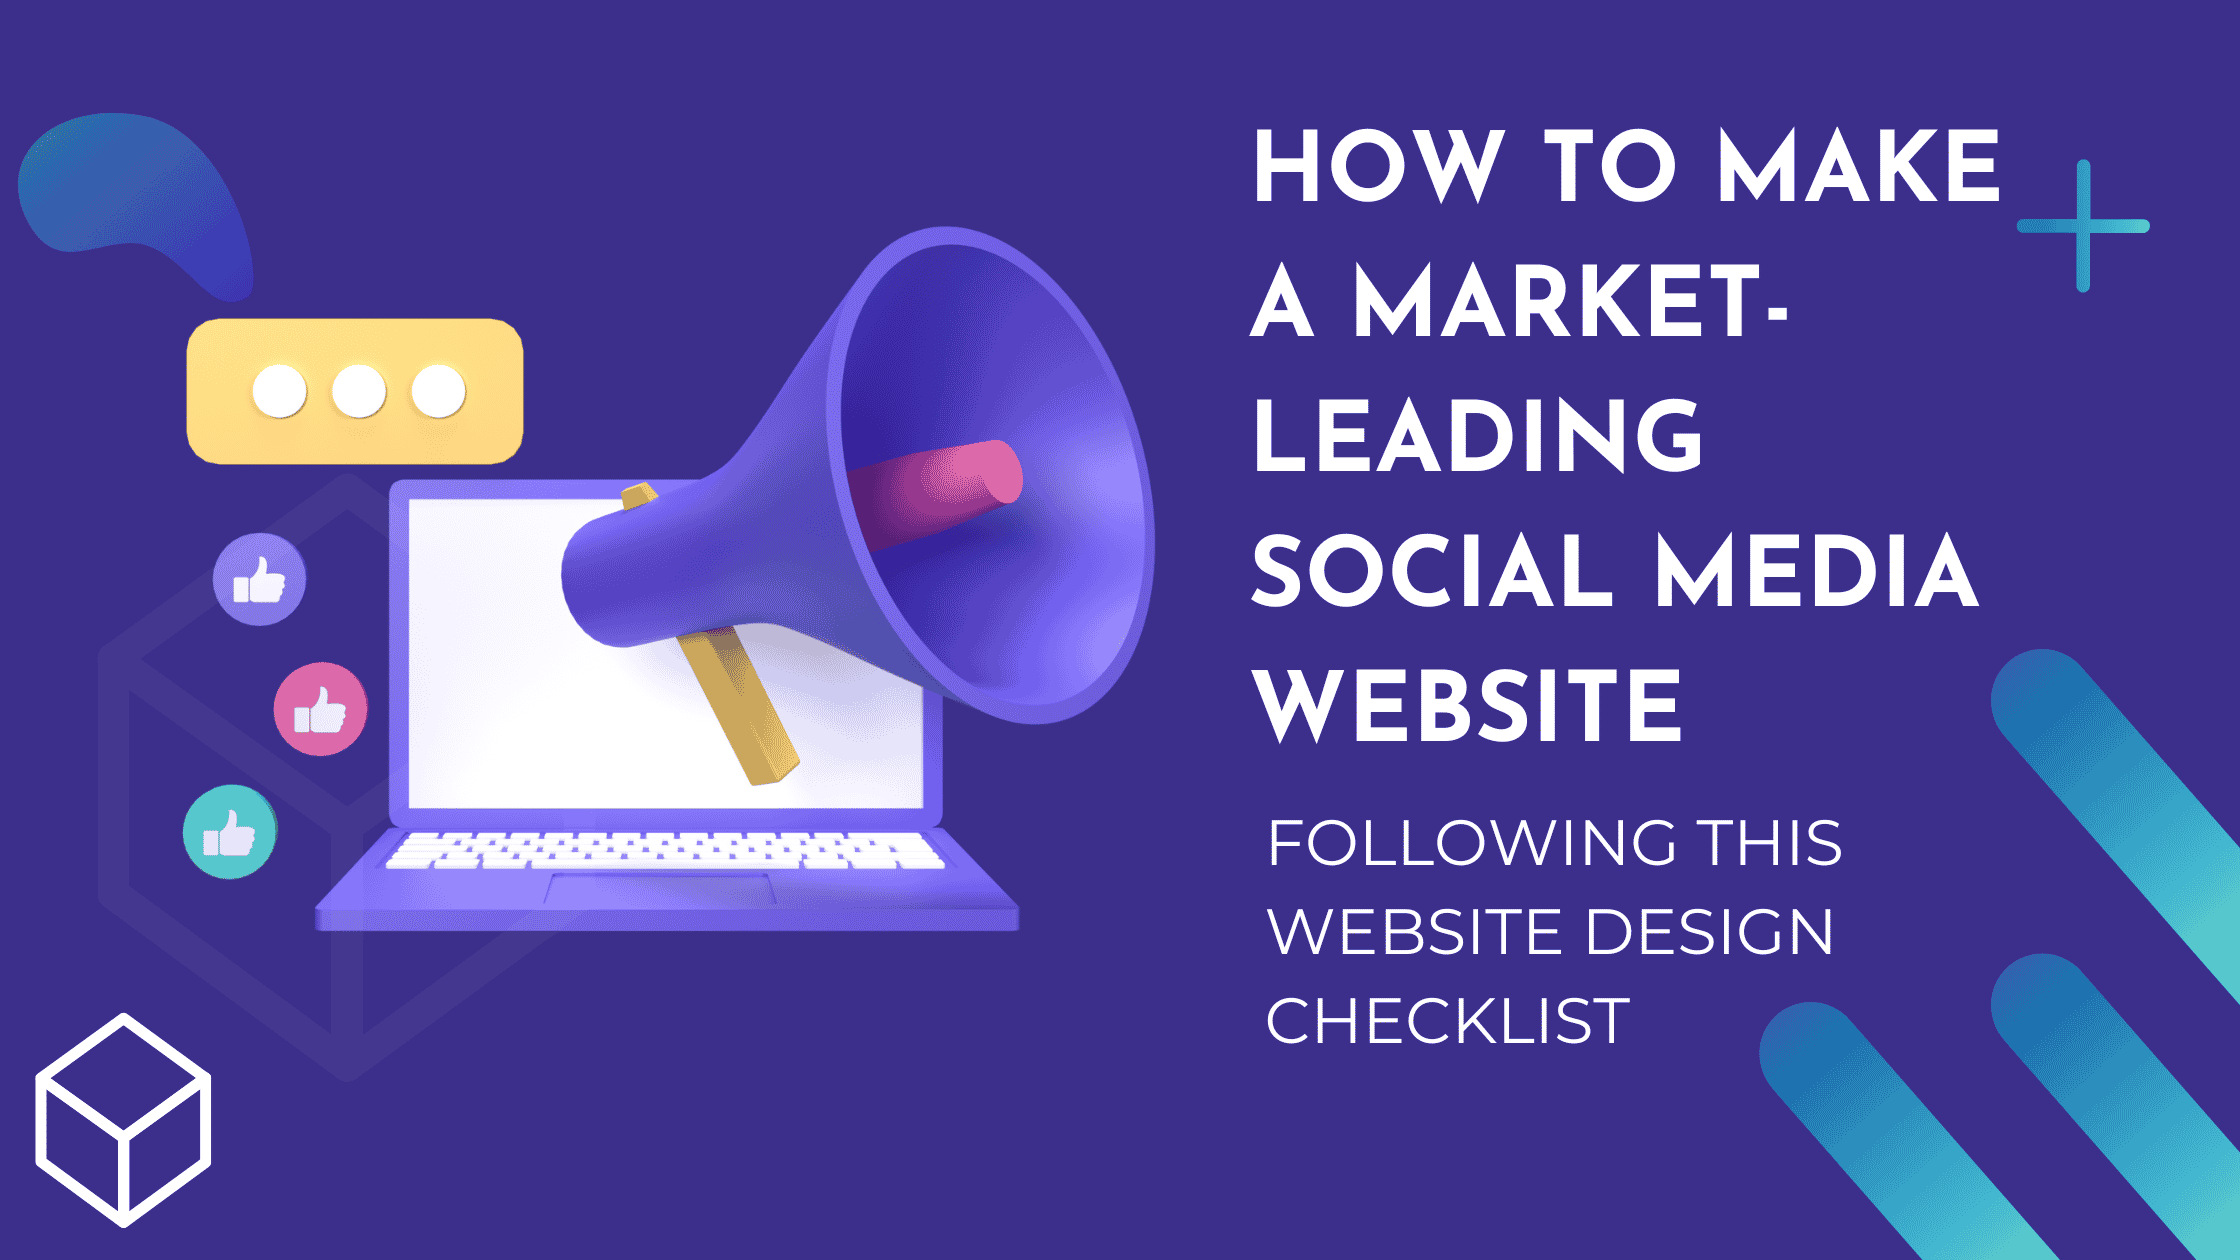 How to Make a Market-Leading Social Media Website, Following this Website Design Checklist